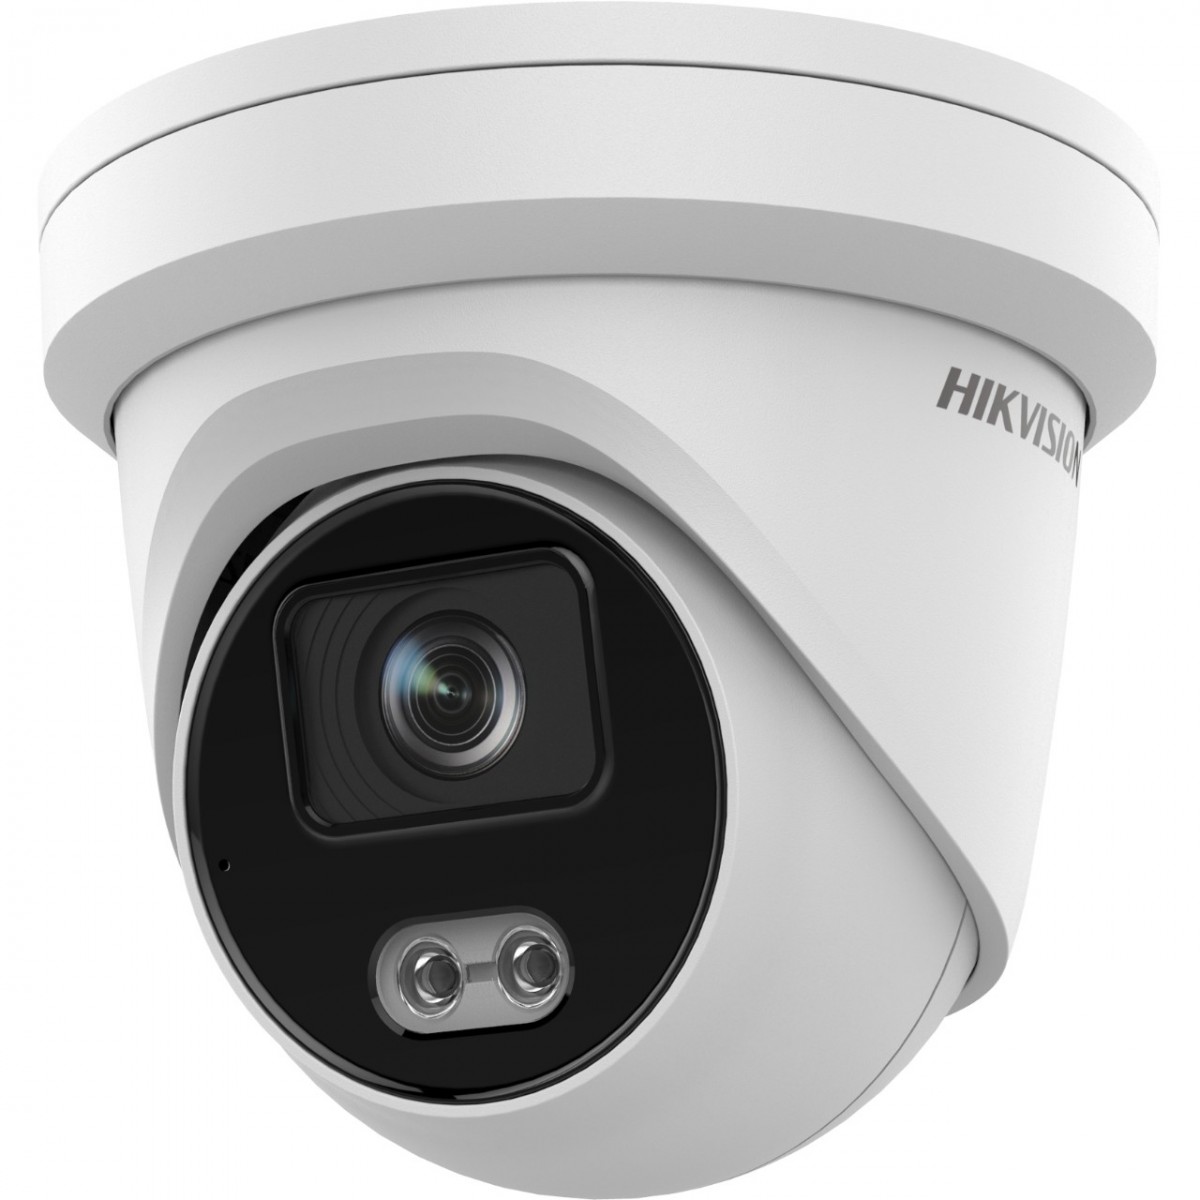 Hikvision Digital Technology DS-2CD2347G2-L(4MM) - IP security camera - Outdoor - Wired - Multi - Class B FCC SDoC (47 CFR Part 